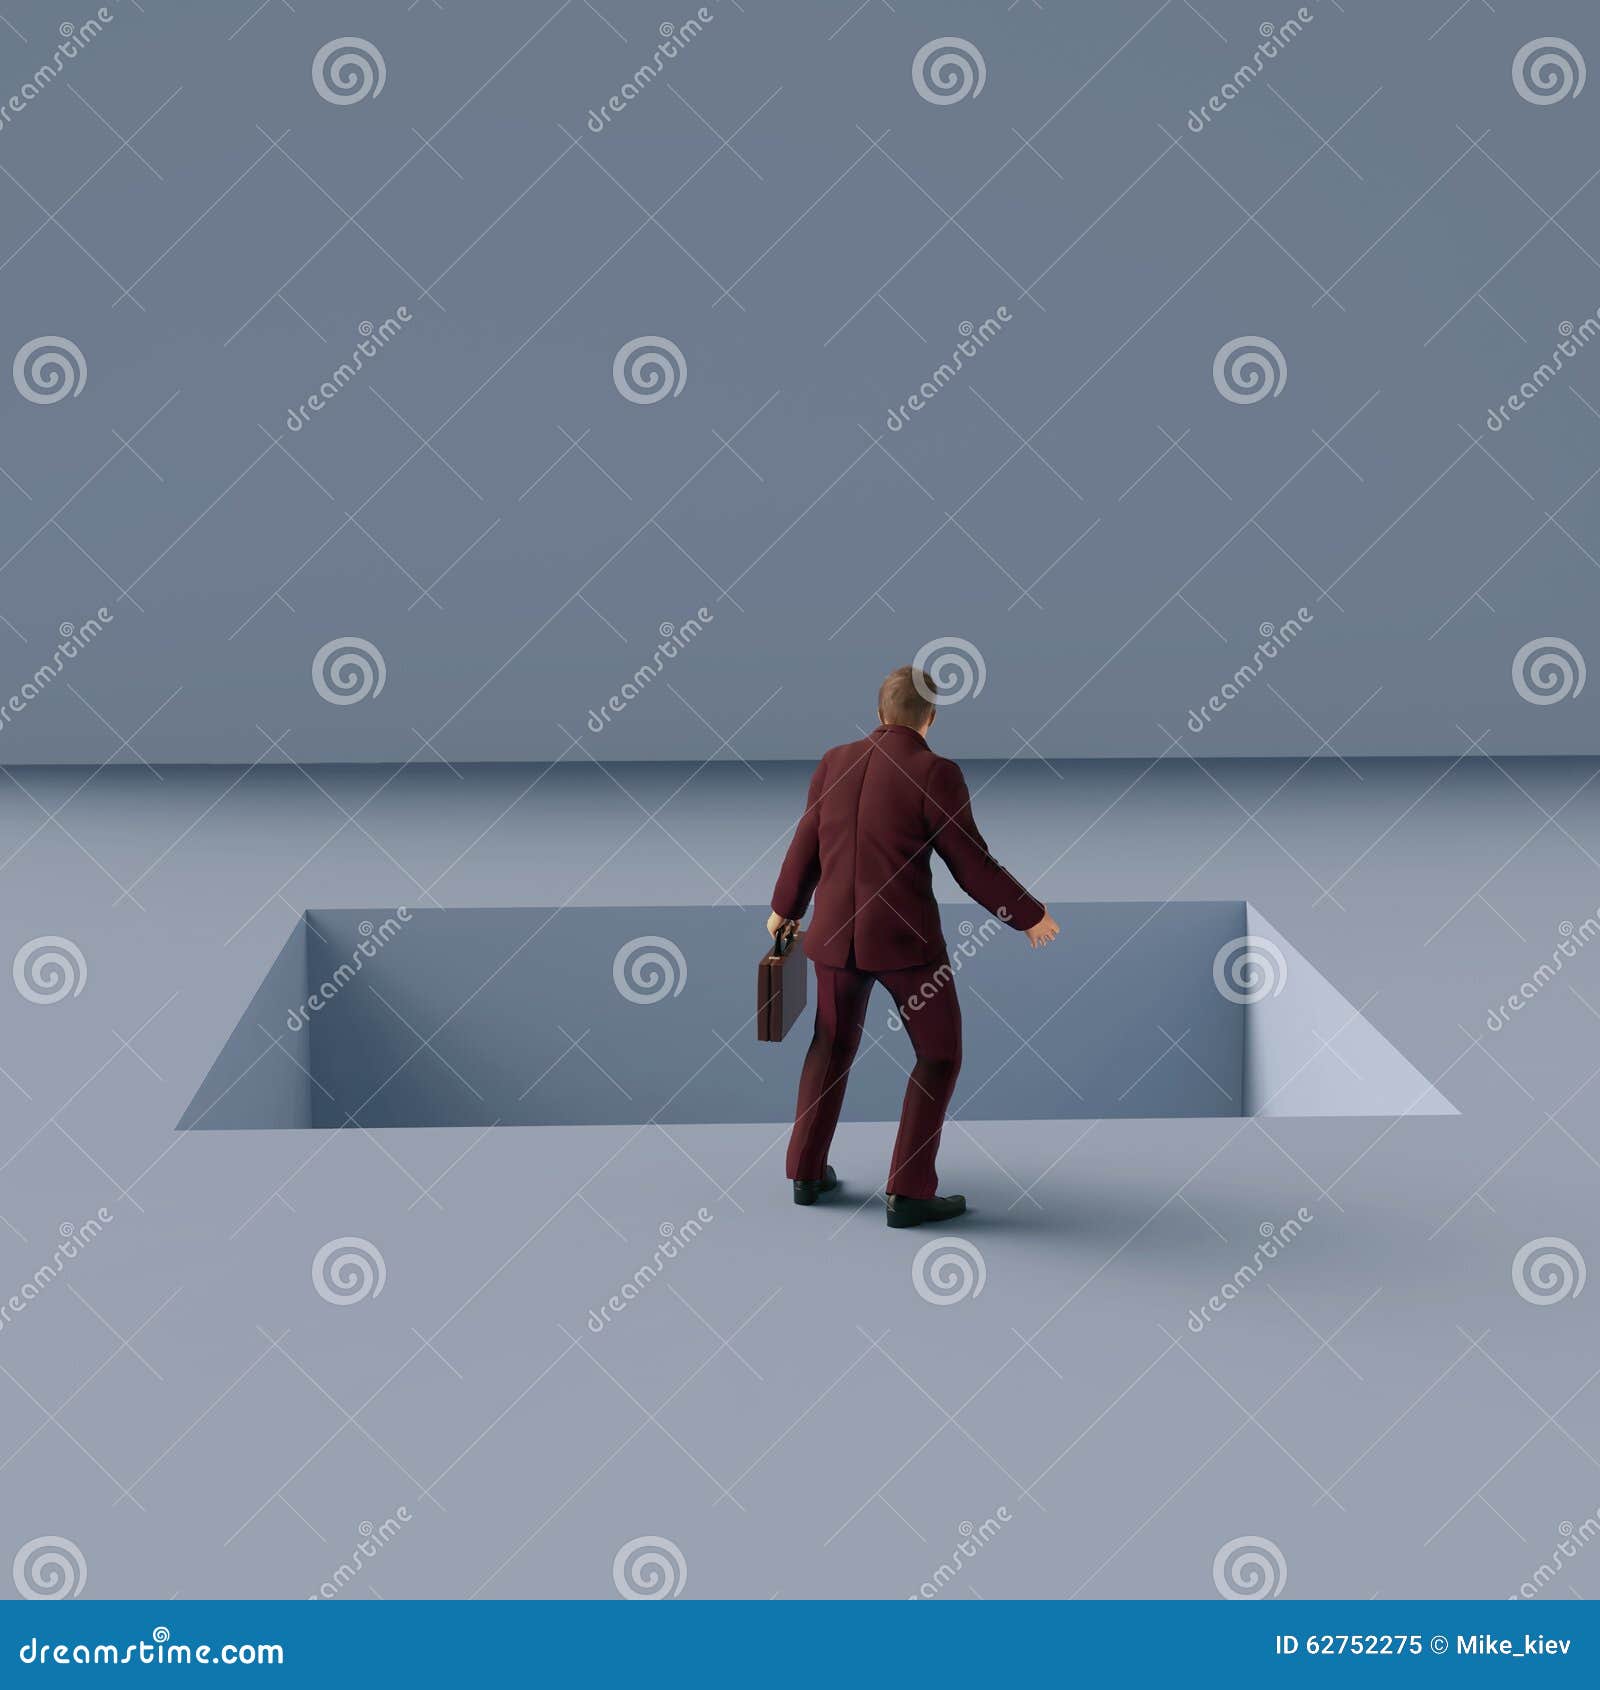 man standing on the edge of pitfall